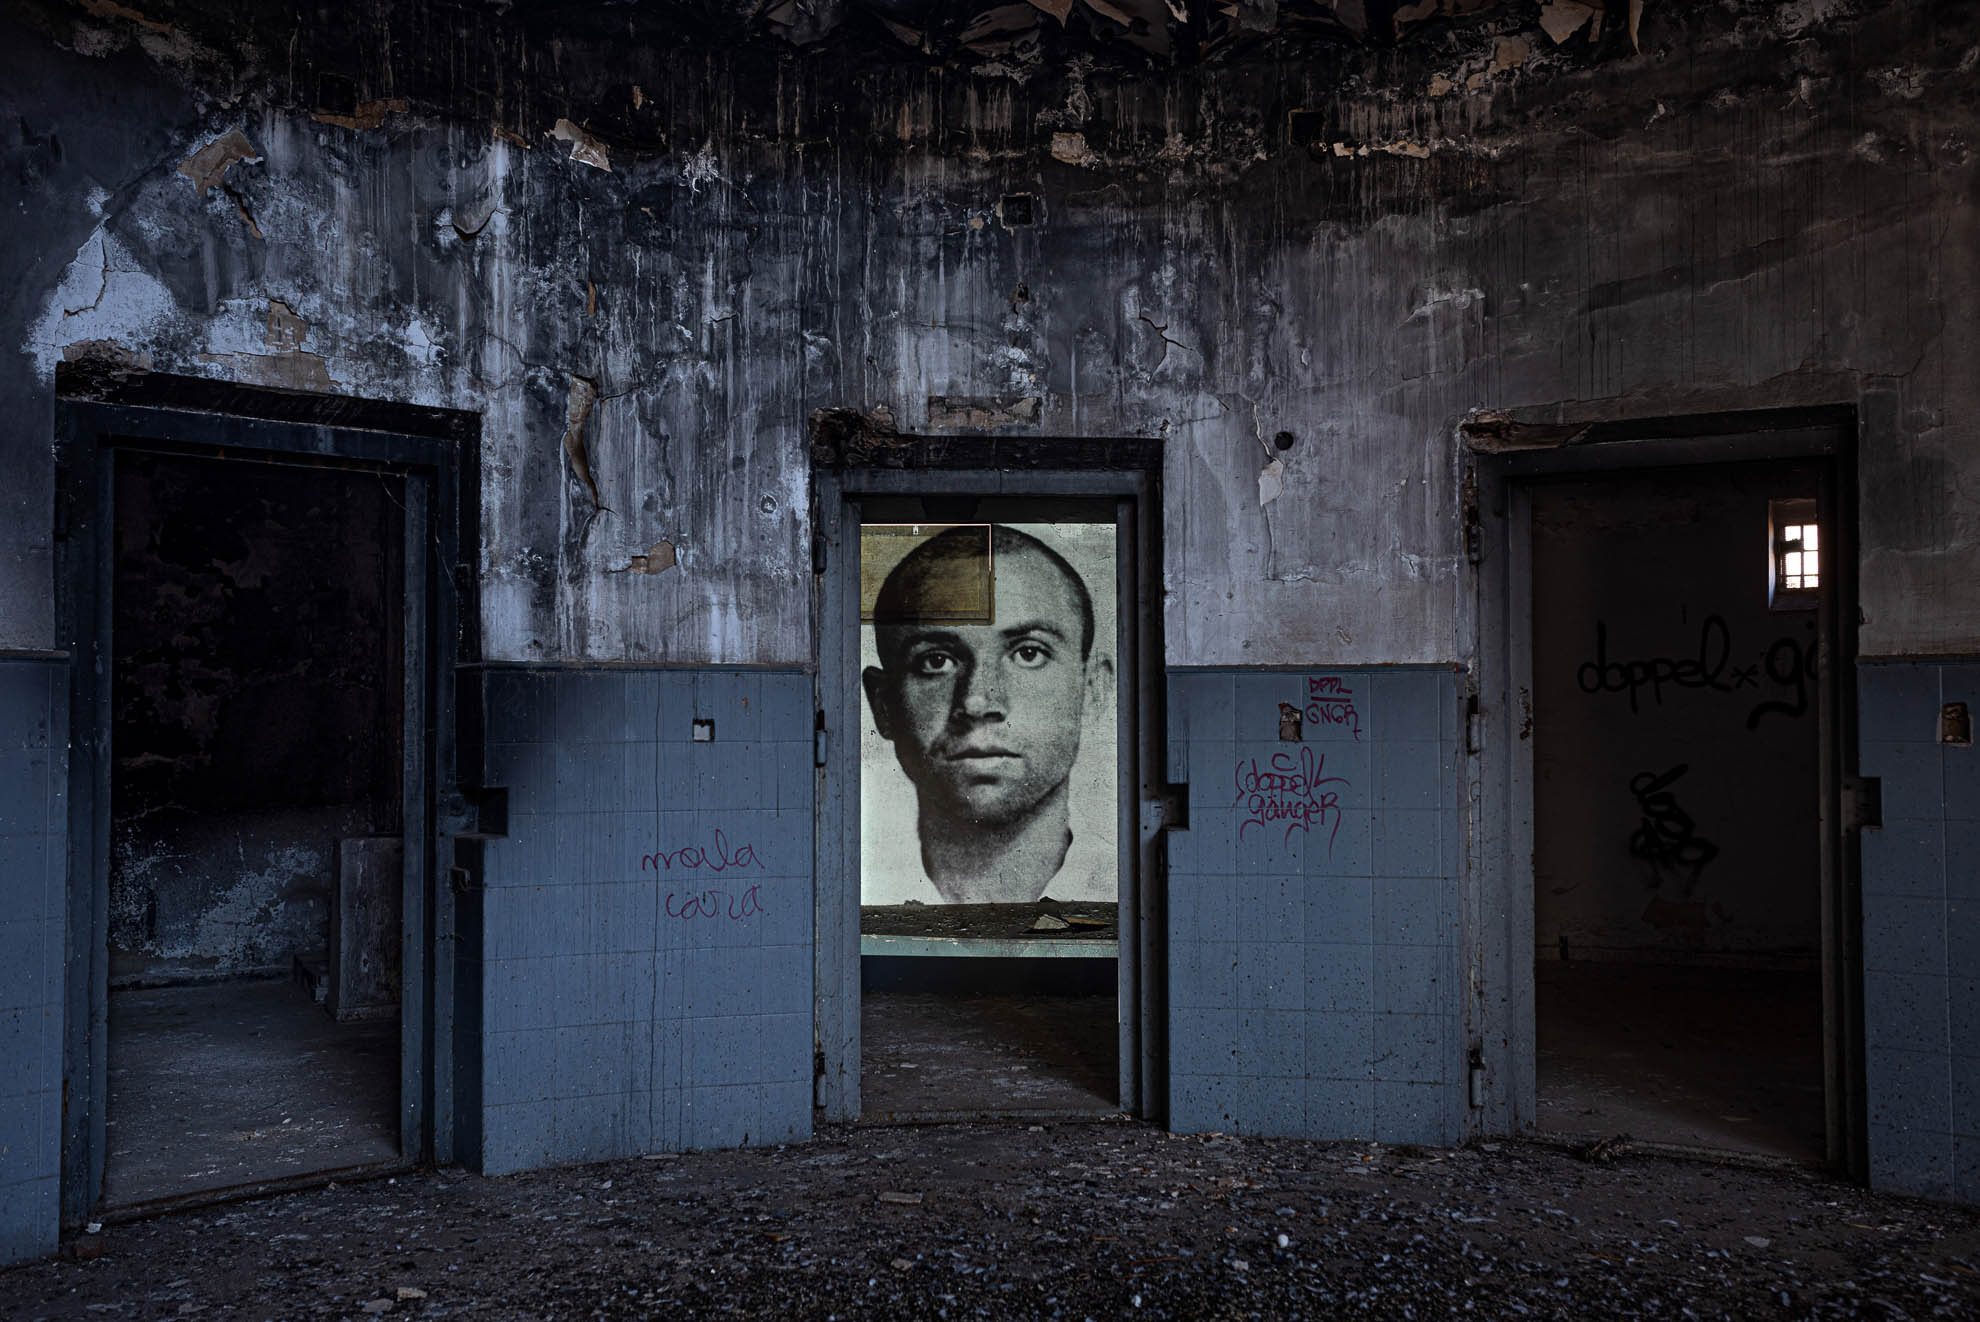 Miguel Hernández, Huelva Provincial Prison, 2021. Projection of a photograph of the poet Miguel Hernández in one of the prison cells where he was imprisoned, after being captured on April 30, 1939, in Moura (Portugal) while trying to flee from Spain.